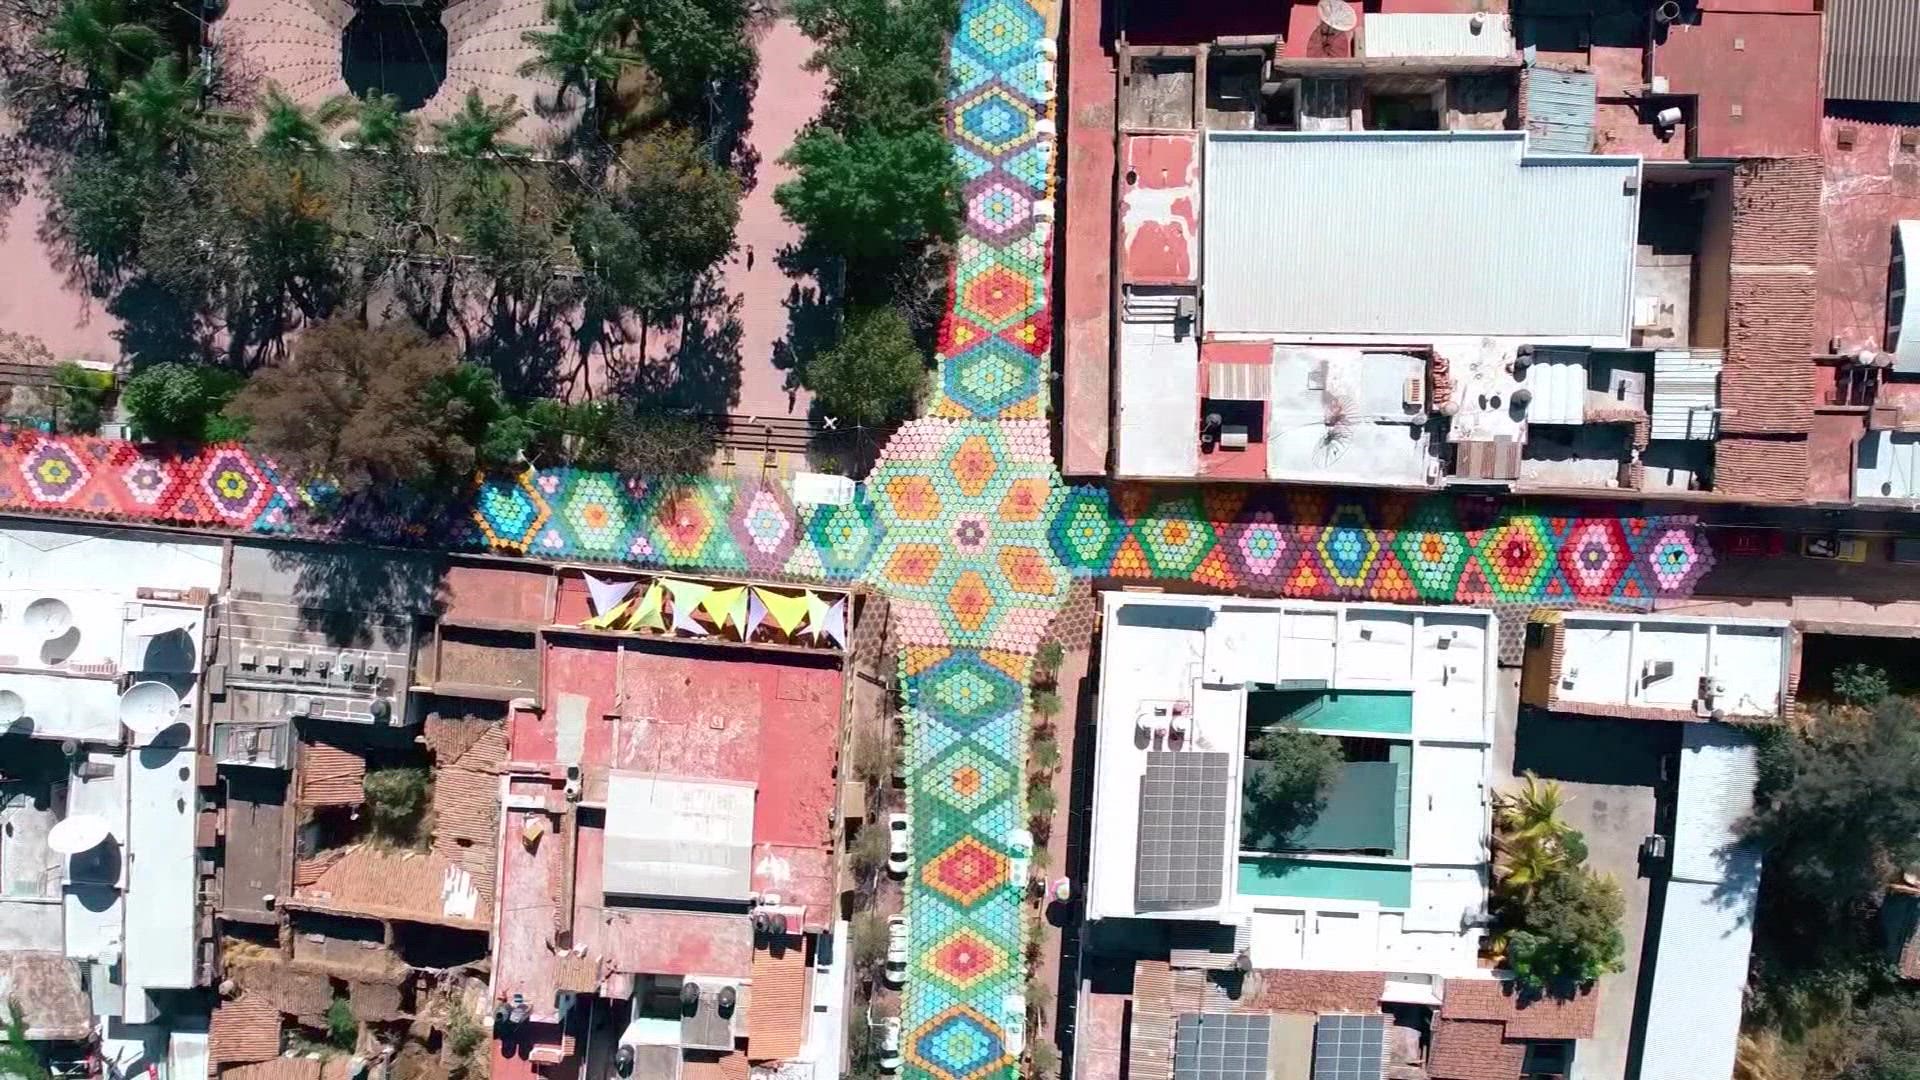 Thousands of fabrics hang from the streets of Etzatlan, located in western Mexico after some 200 craftswomen created a woven sky honoring the lord of mercy.